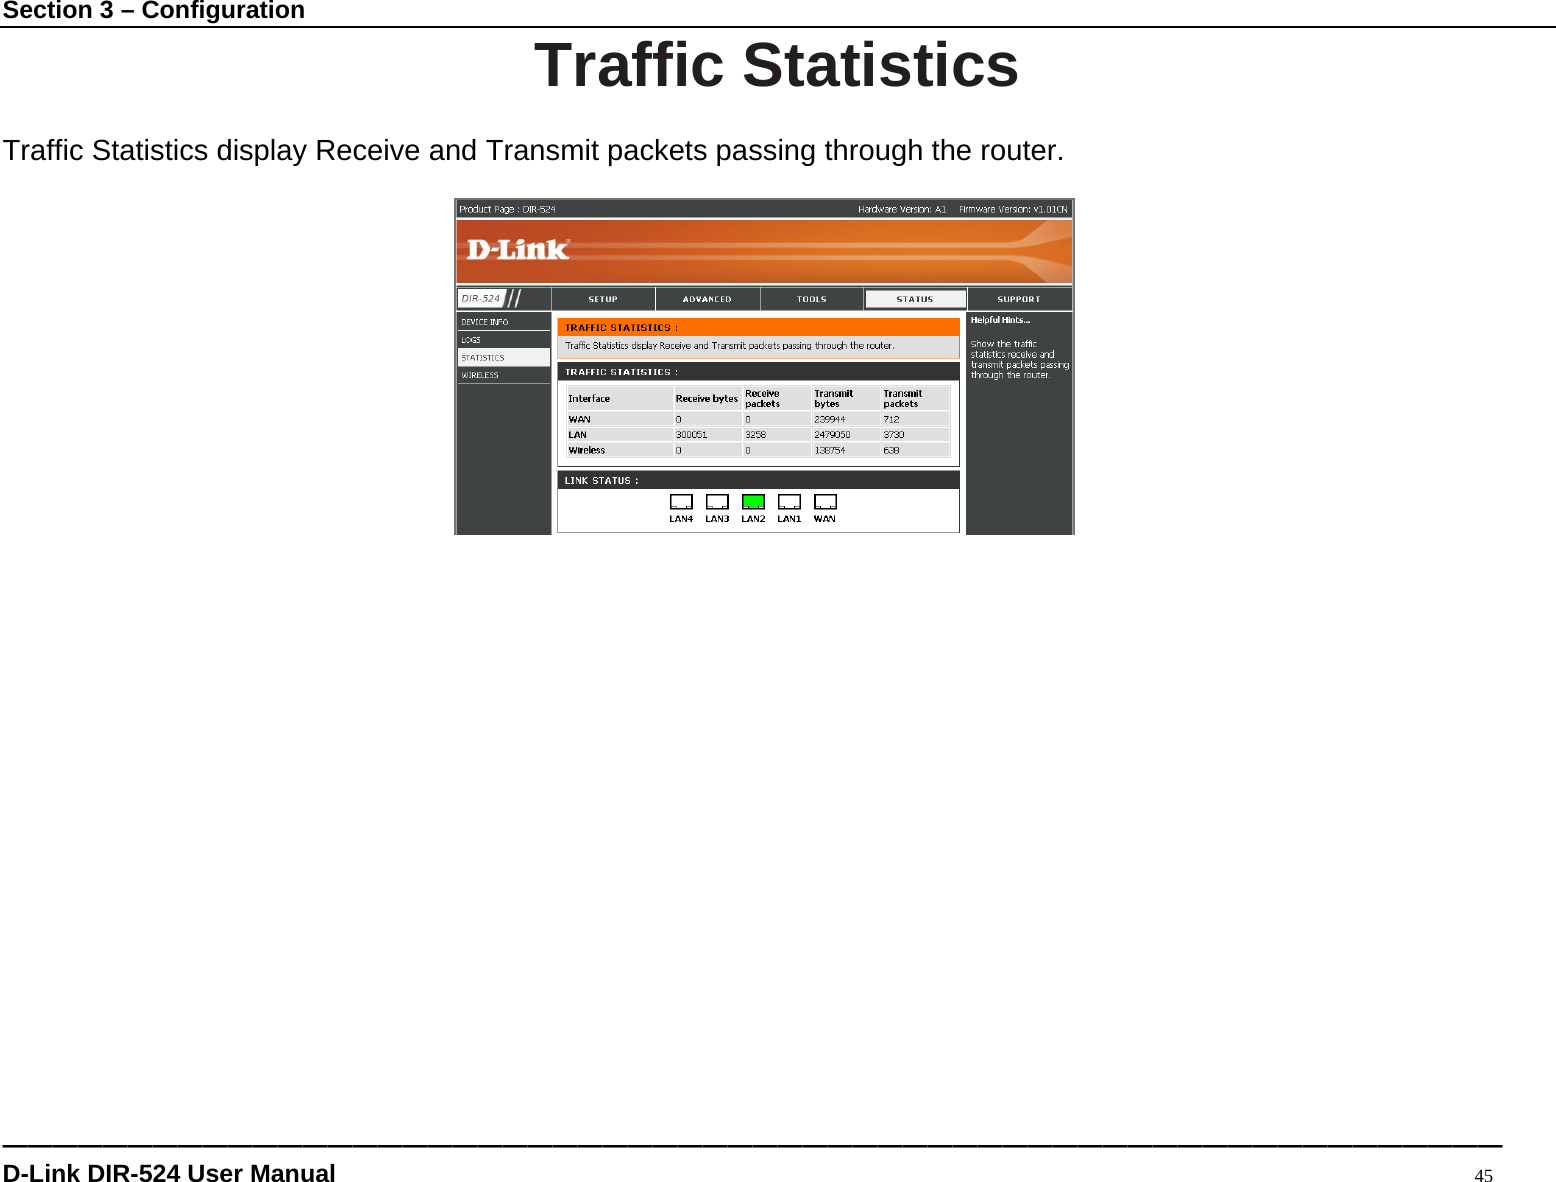 Section 3 – Configuration ———————————————————————————————————————————————————————————— D-Link DIR-524 User Manual                                                                                           45 Traffic Statistics  Traffic Statistics display Receive and Transmit packets passing through the router.                       